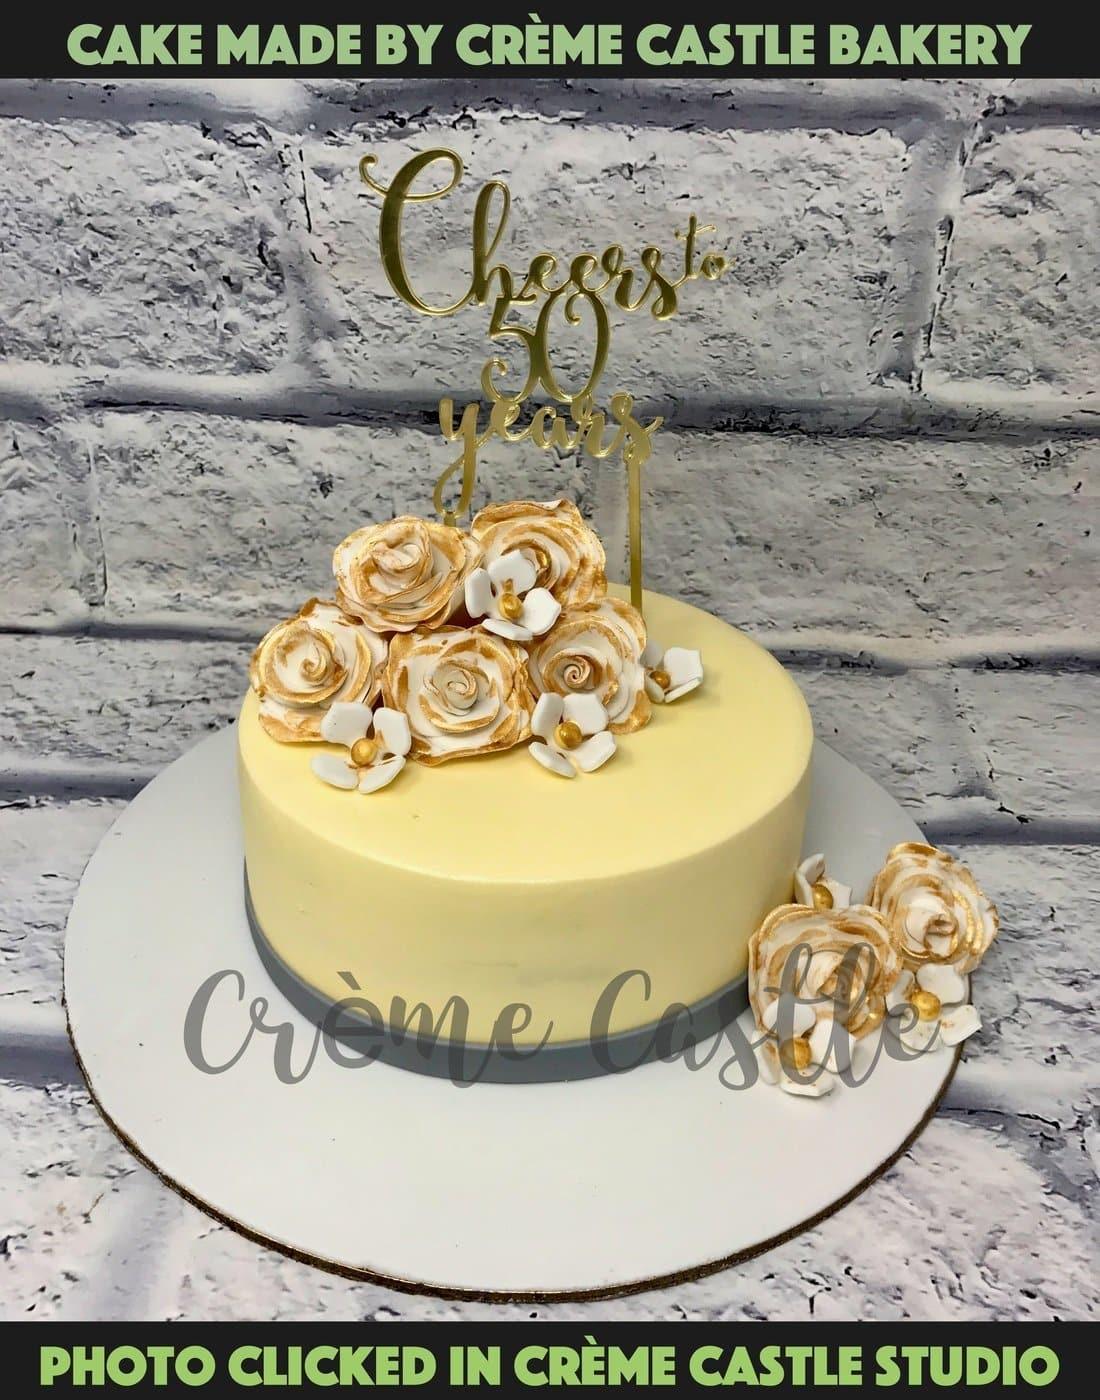 MoMa Cakes - Large number 50 cake with gold details.... | Facebook